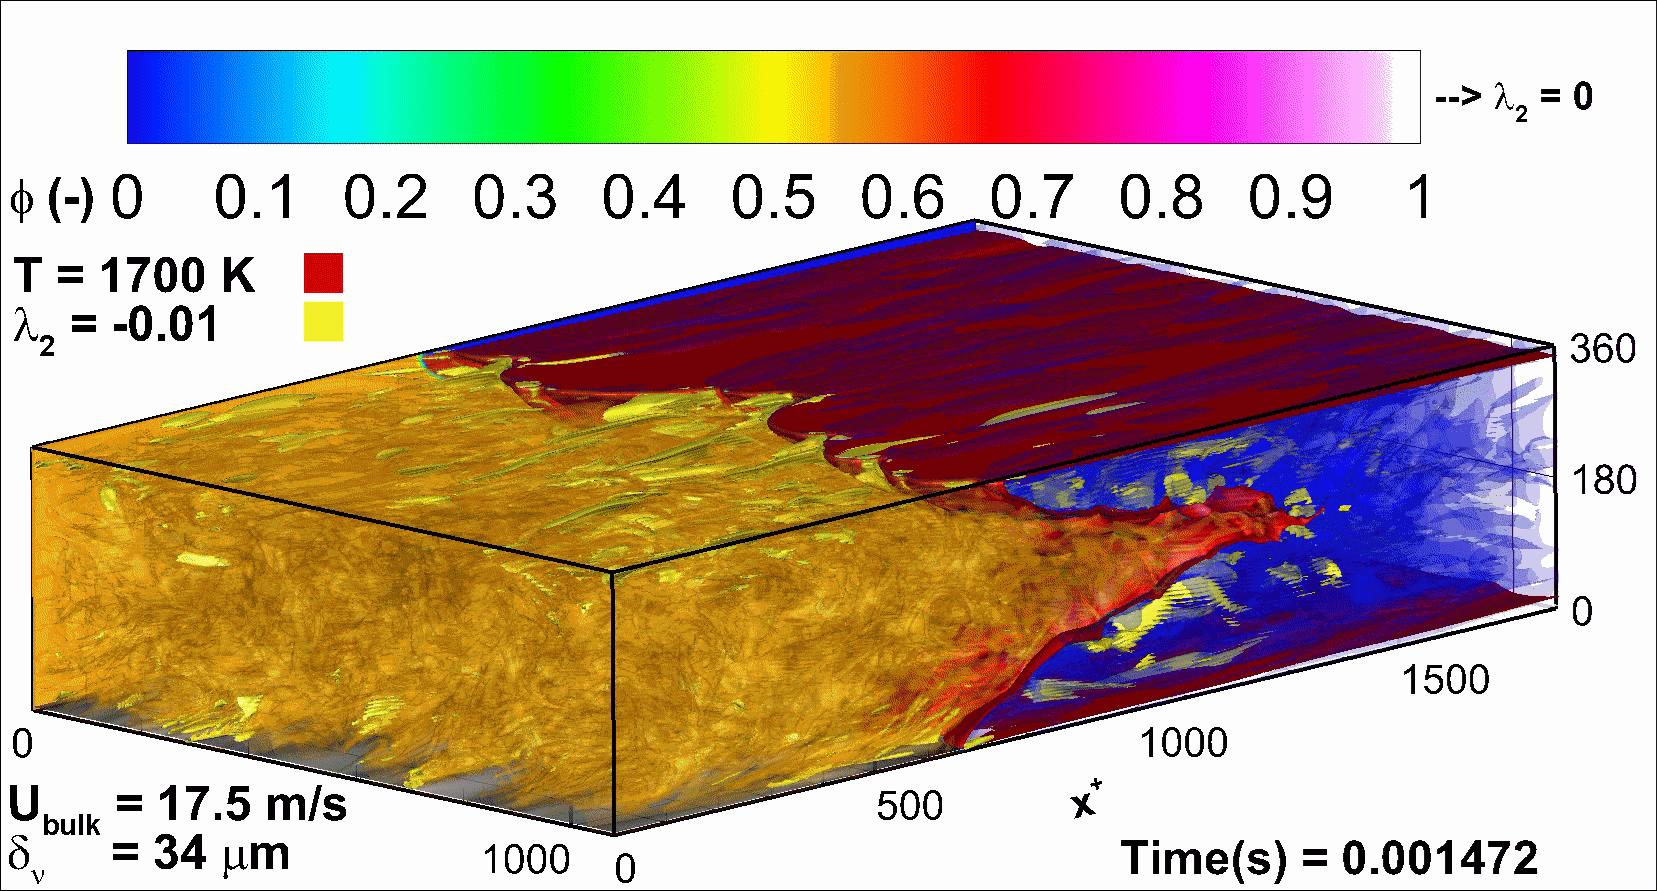 Upstream flame propagation in fully developed channel flow with premixed to stratified mixture transition: flow is in the positive x-direction (from left to right), flame moves upstream against the bulk flow (from right to left), channel flow turbulence is visualized by isosurfaces of the second invariant of the velocity gradient tensor (lambda2) and the flame by the red isosurface (T=1700K).